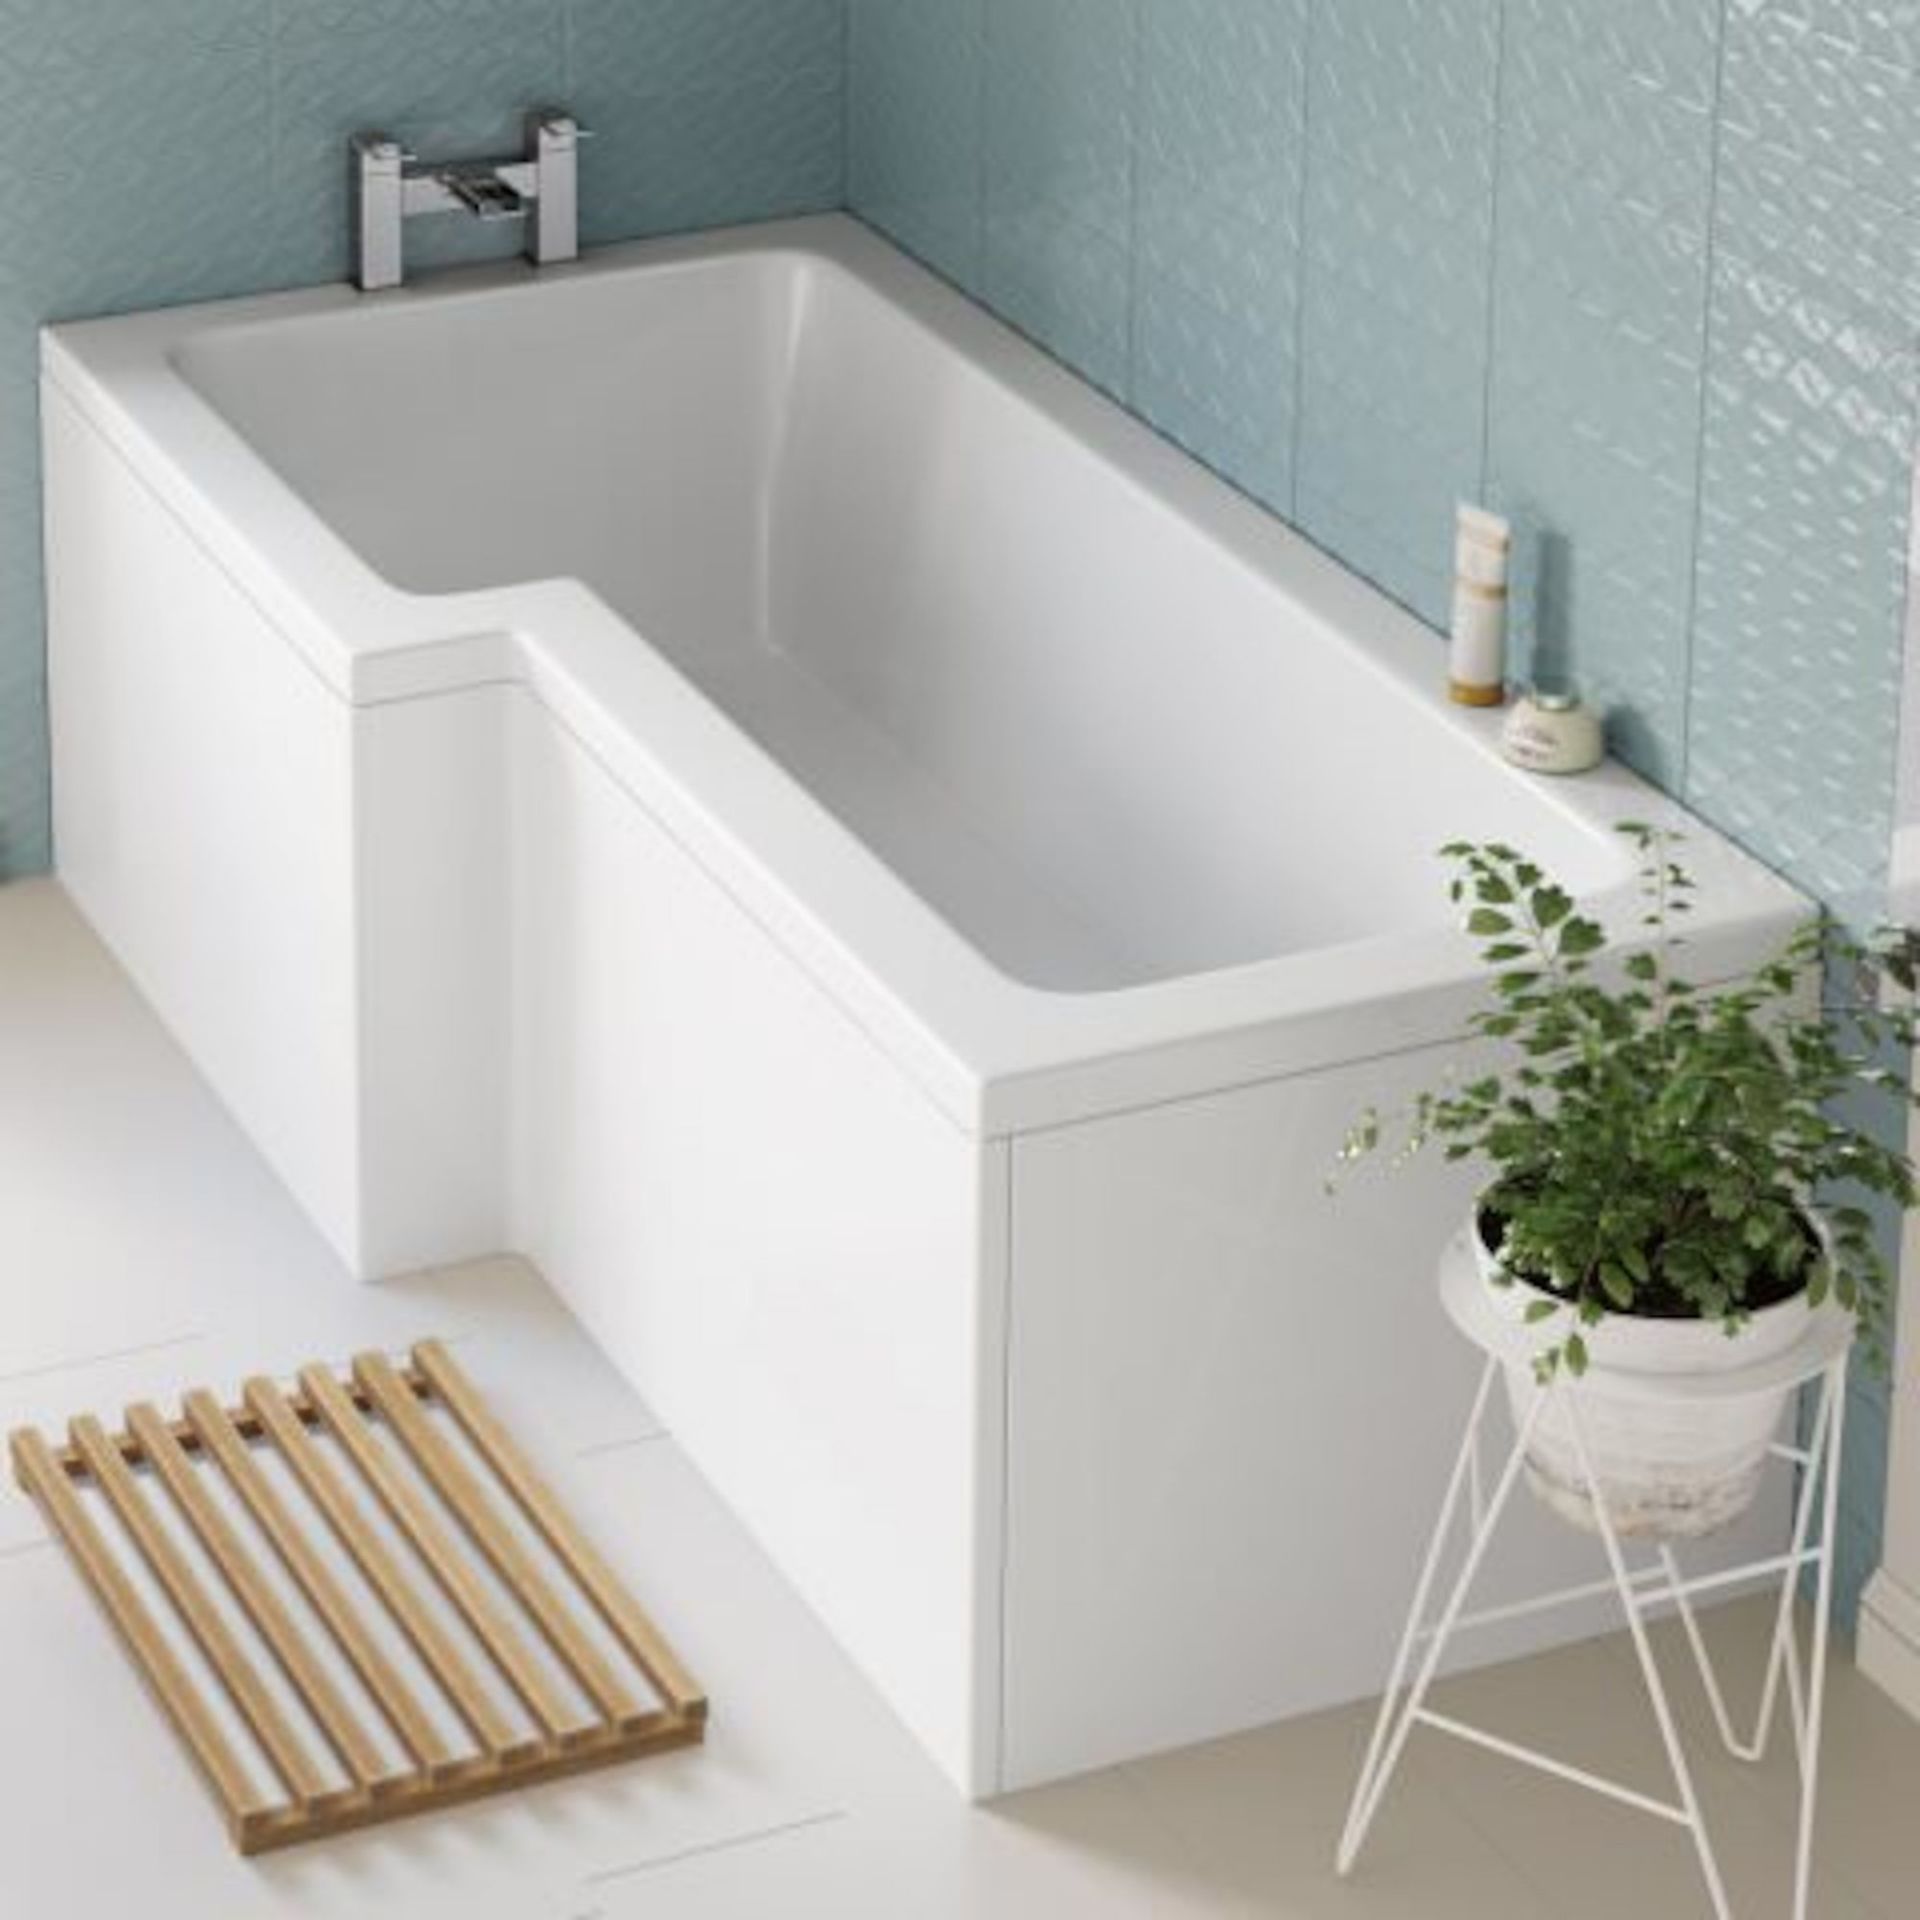 NEW (C52) 1700x800mm Left Hand L-Shaped Bath. RRP £239.99.Constructed from high quality acryl... - Image 2 of 3